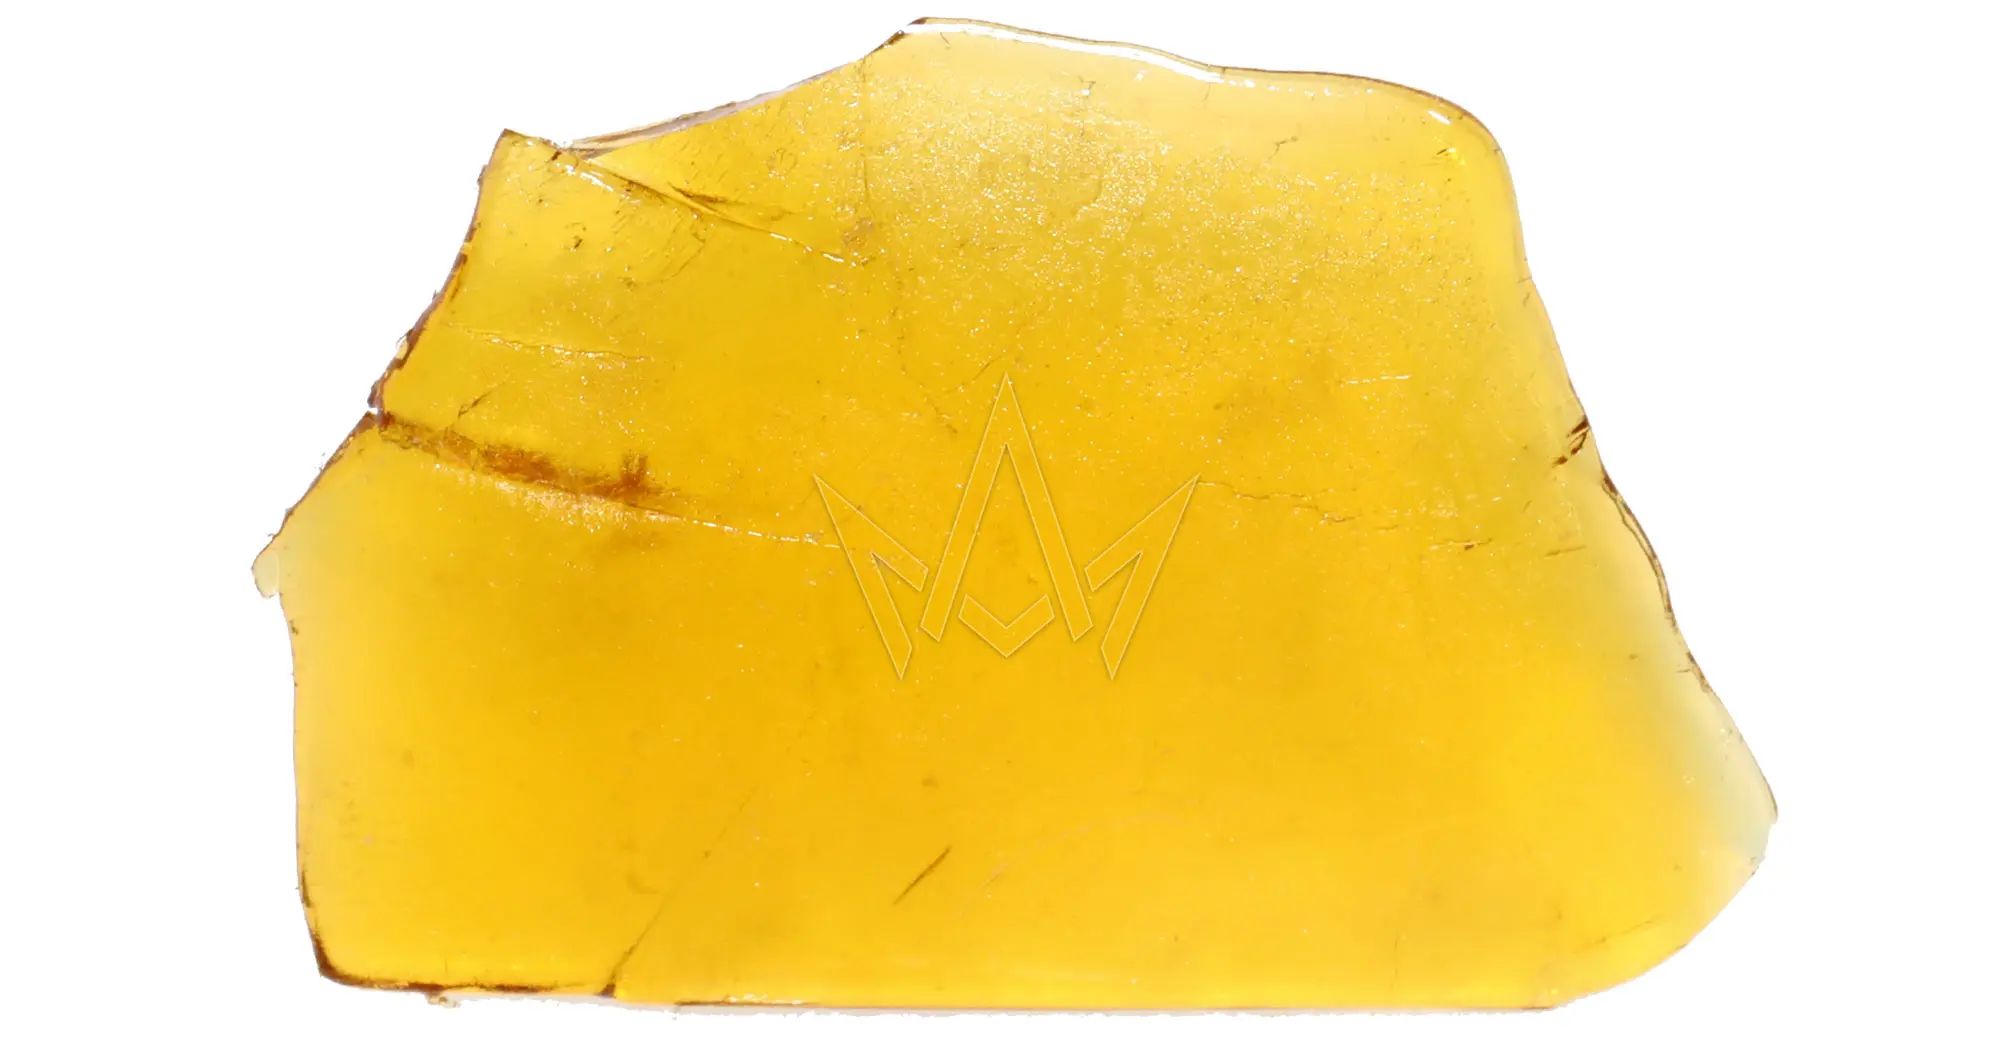 Ambrosia Cured Resin Shatter